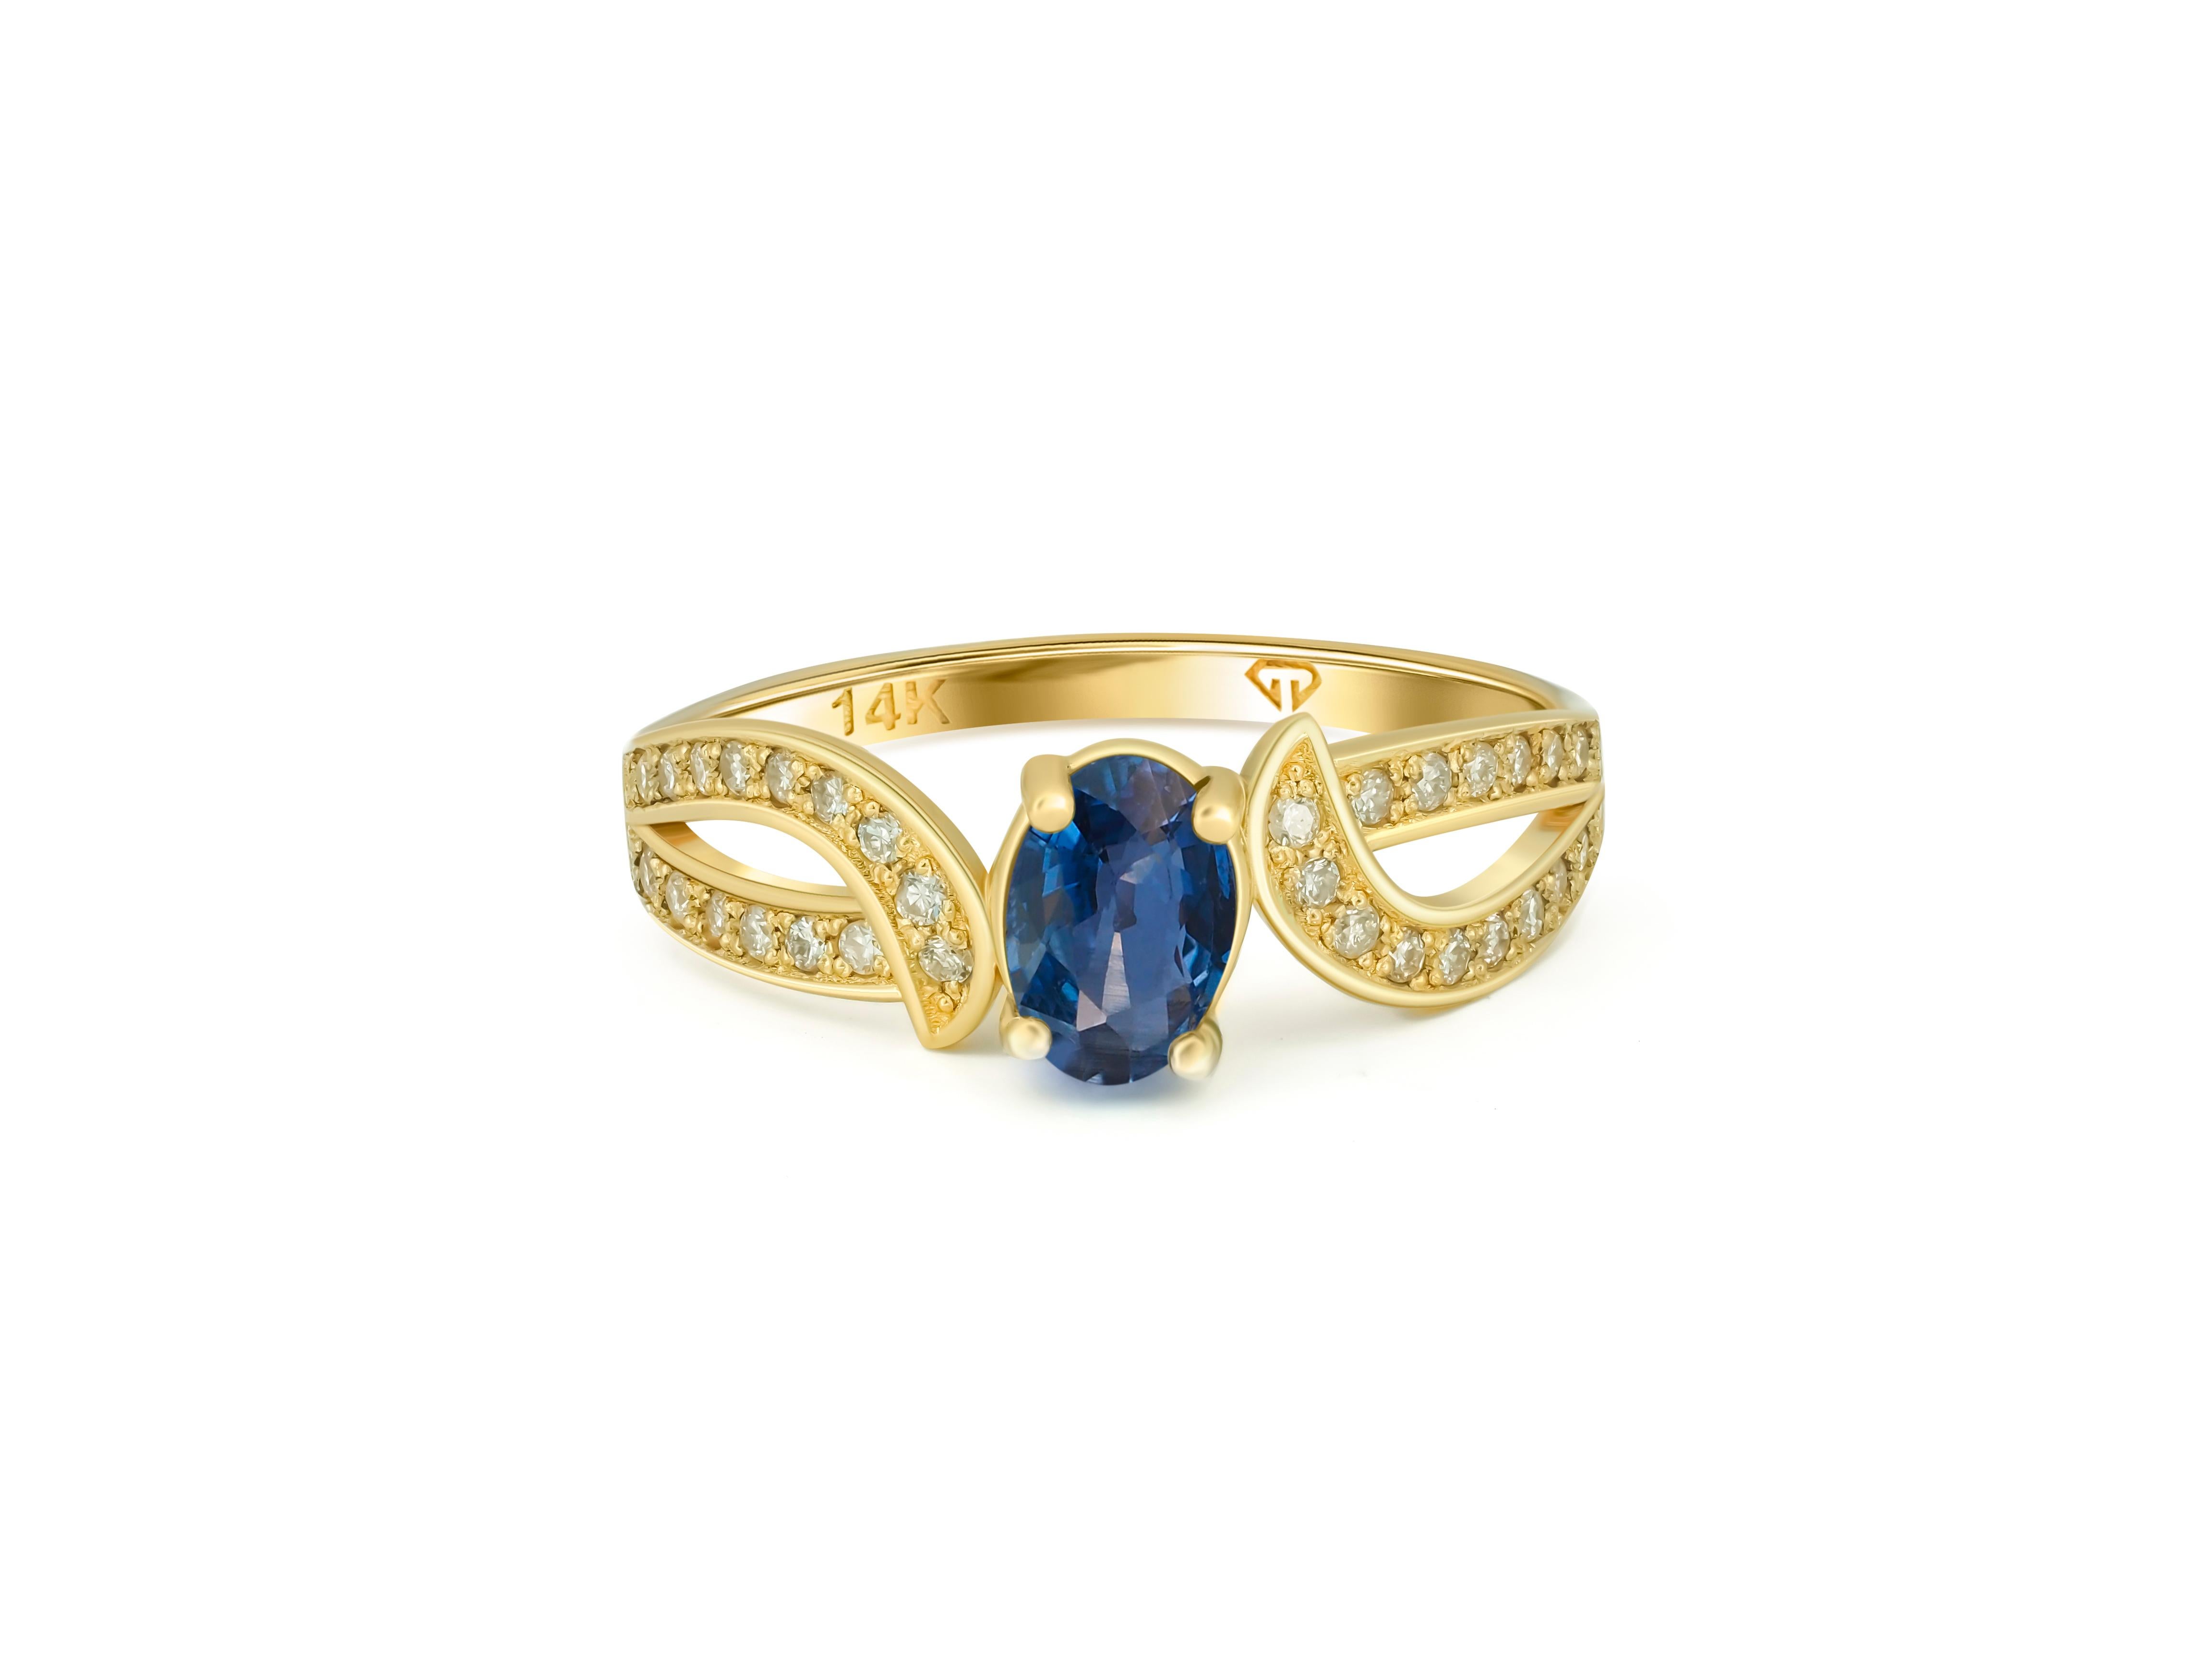 Genuine sapphire 14k gold ring. 
Sapphire engagement ring. Sapphire vintage ring. Sapphire gold ring. Blue sapphire ring.

Metal: 14kt solid gold
Total weight: 2 gr. (depends from size).

Central gemstone: Natural sapphire
Color: blue
Oval cut, 0.80